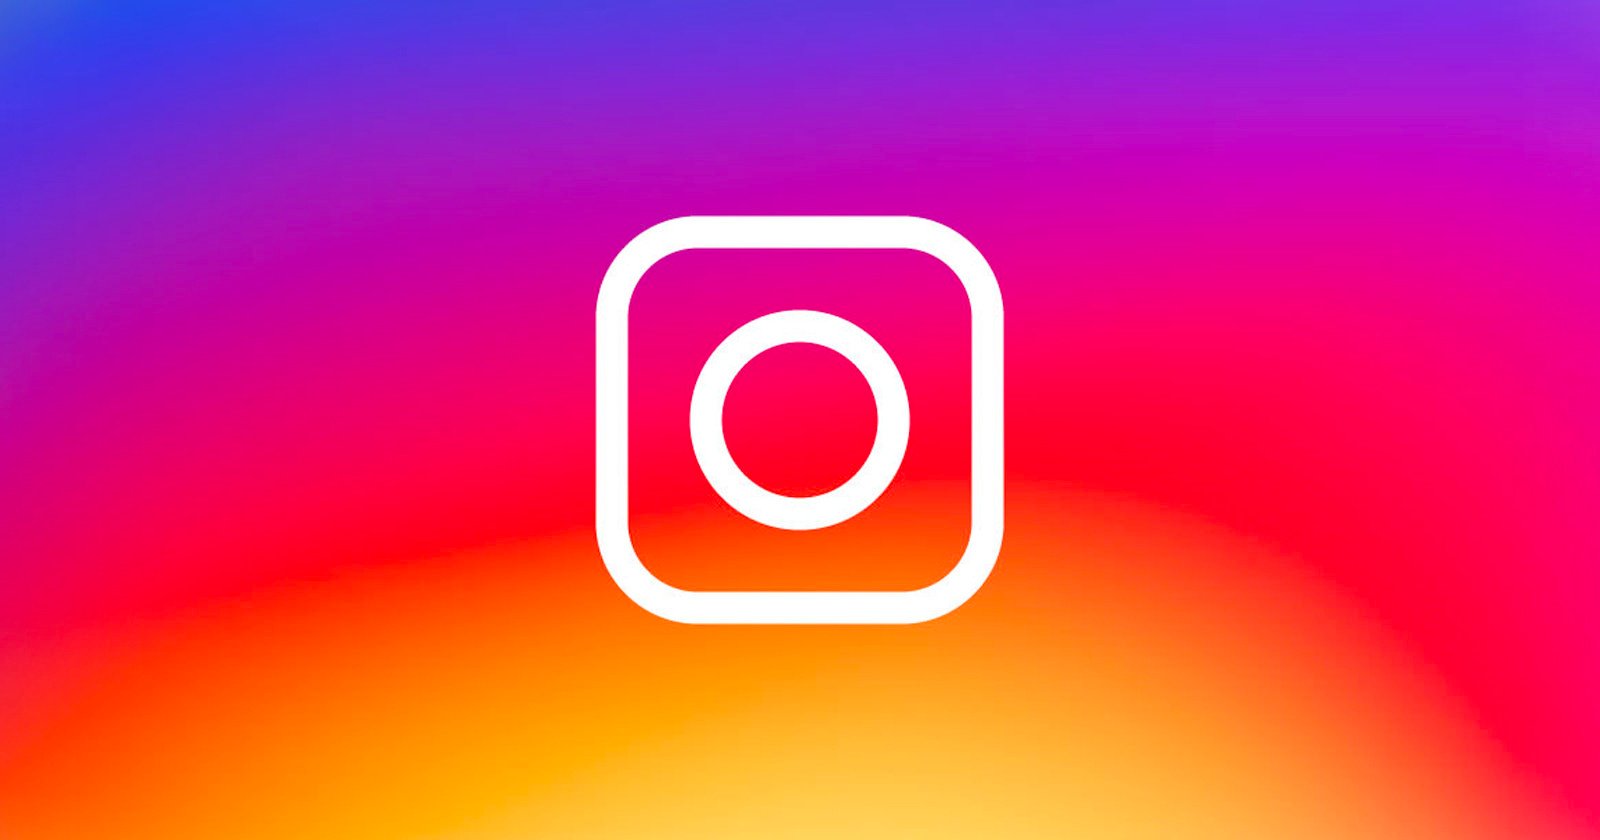  instagram hide potentially harmful content farther down feeds 